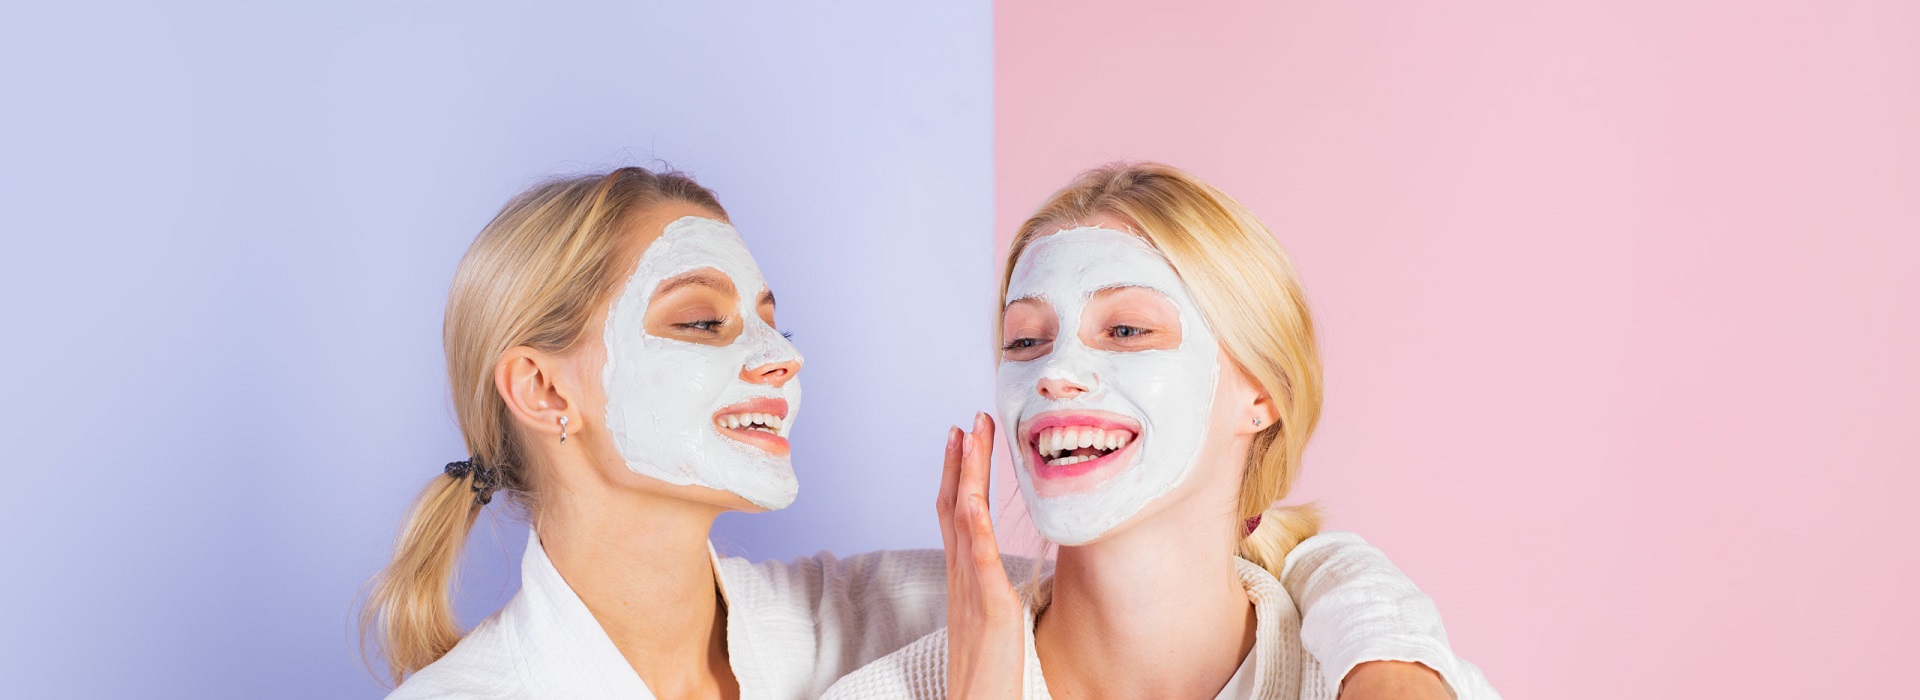 Teen Beauty Influencers Are Using Anti-Aging Skin Care